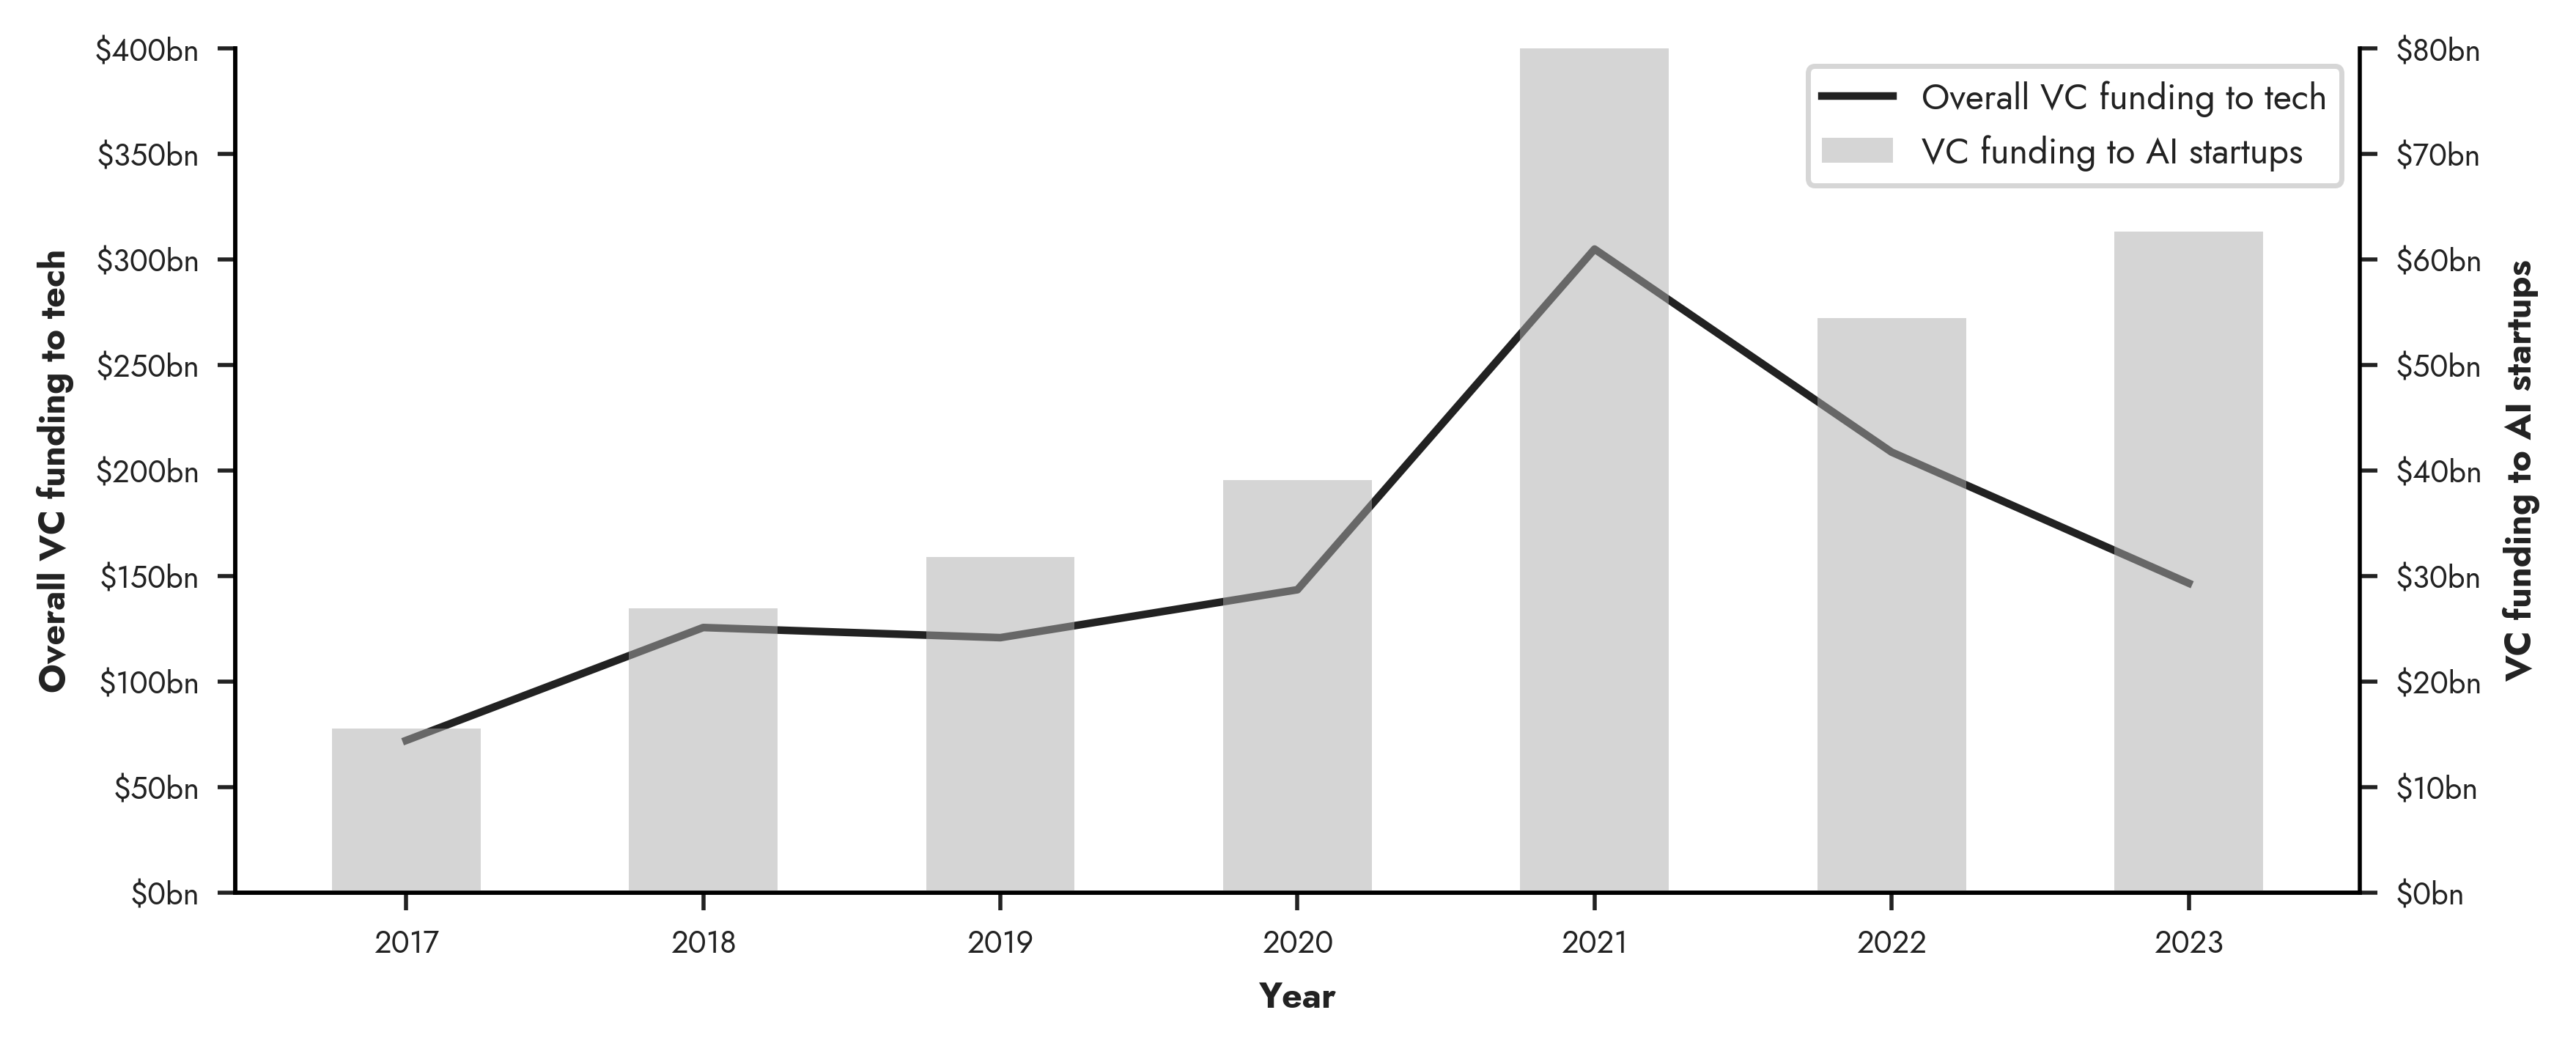 Figure showing the steady rise of AI venture capital investing even when there has been a recent decline in technology venture capital investing.